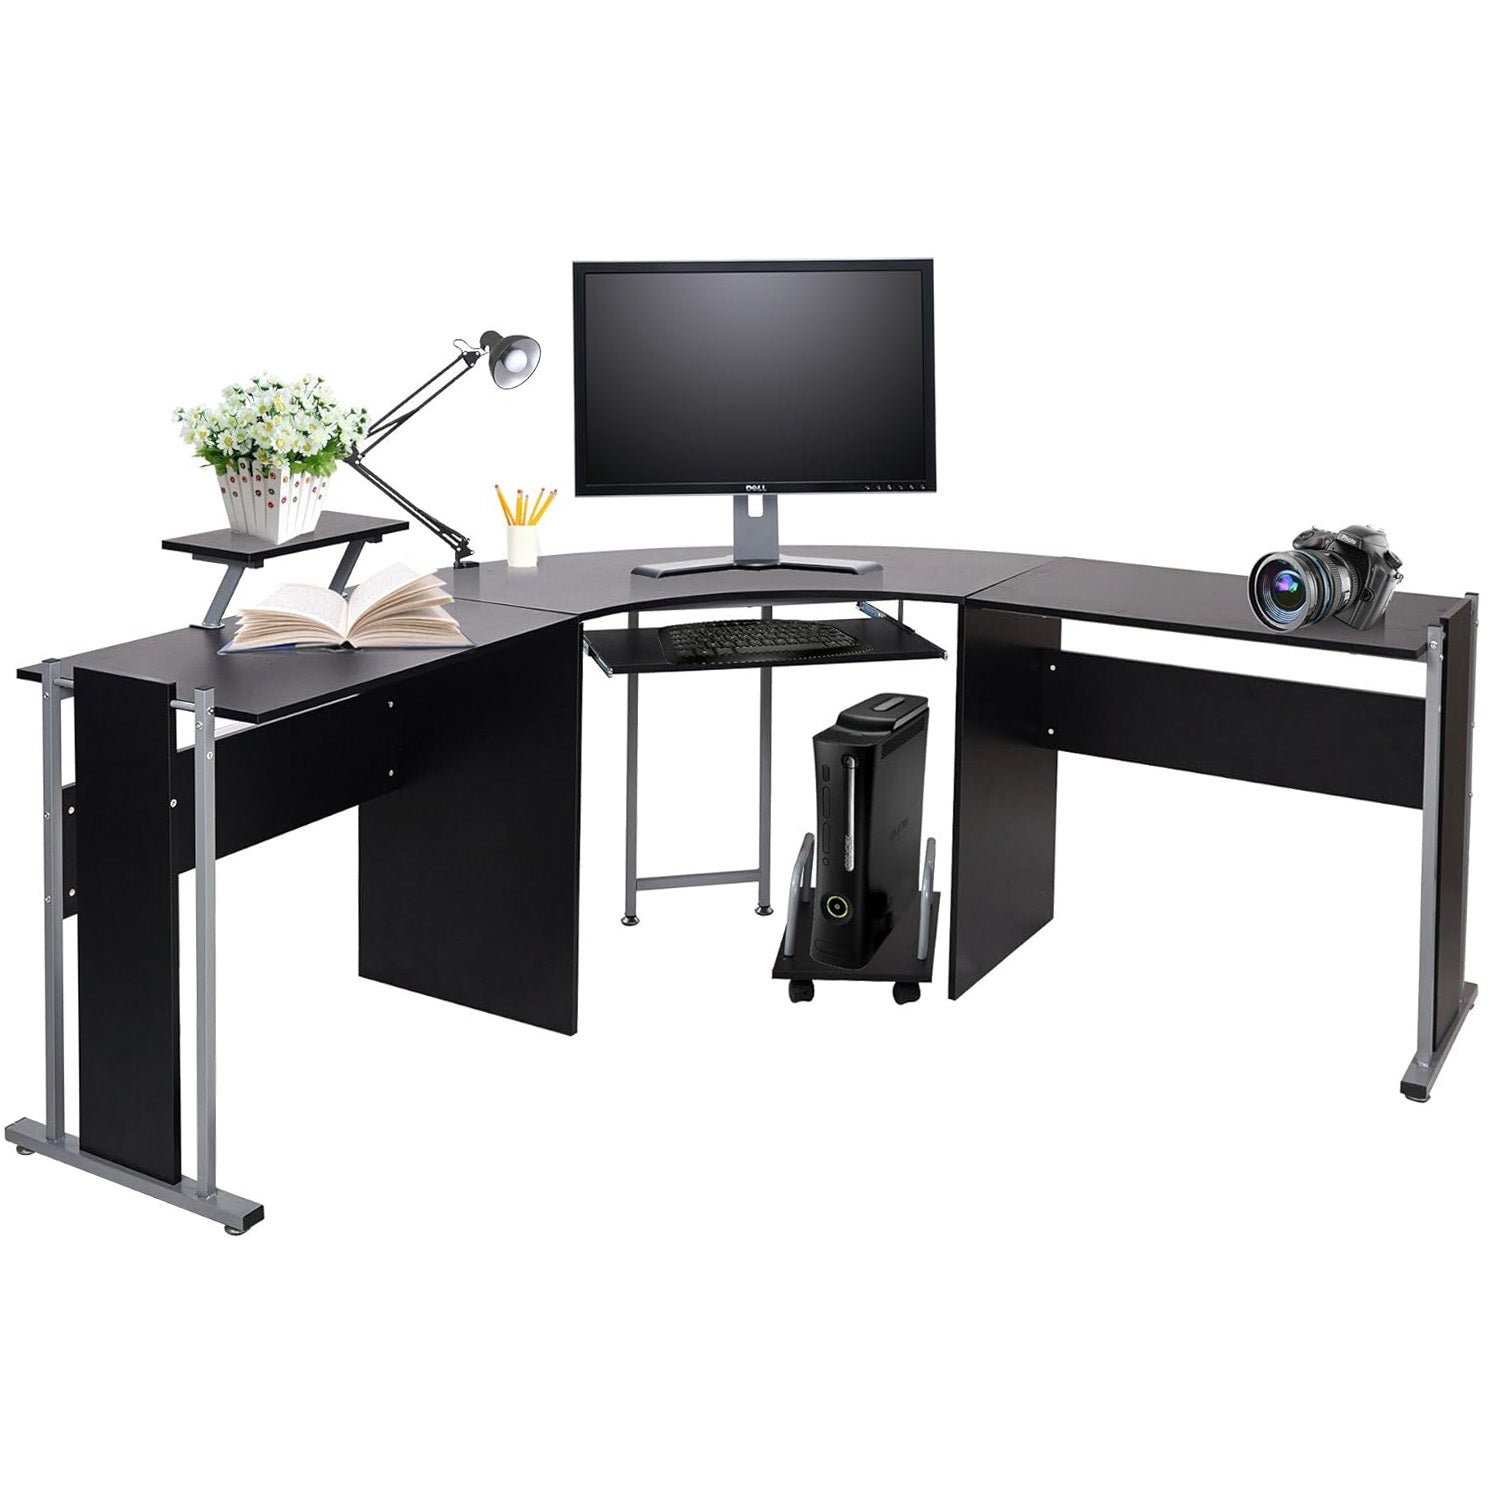 71" L Shaped Gaming Desk with Monitor Stand Keyboard Tray Home Office Large Computer Corner Desk, Black